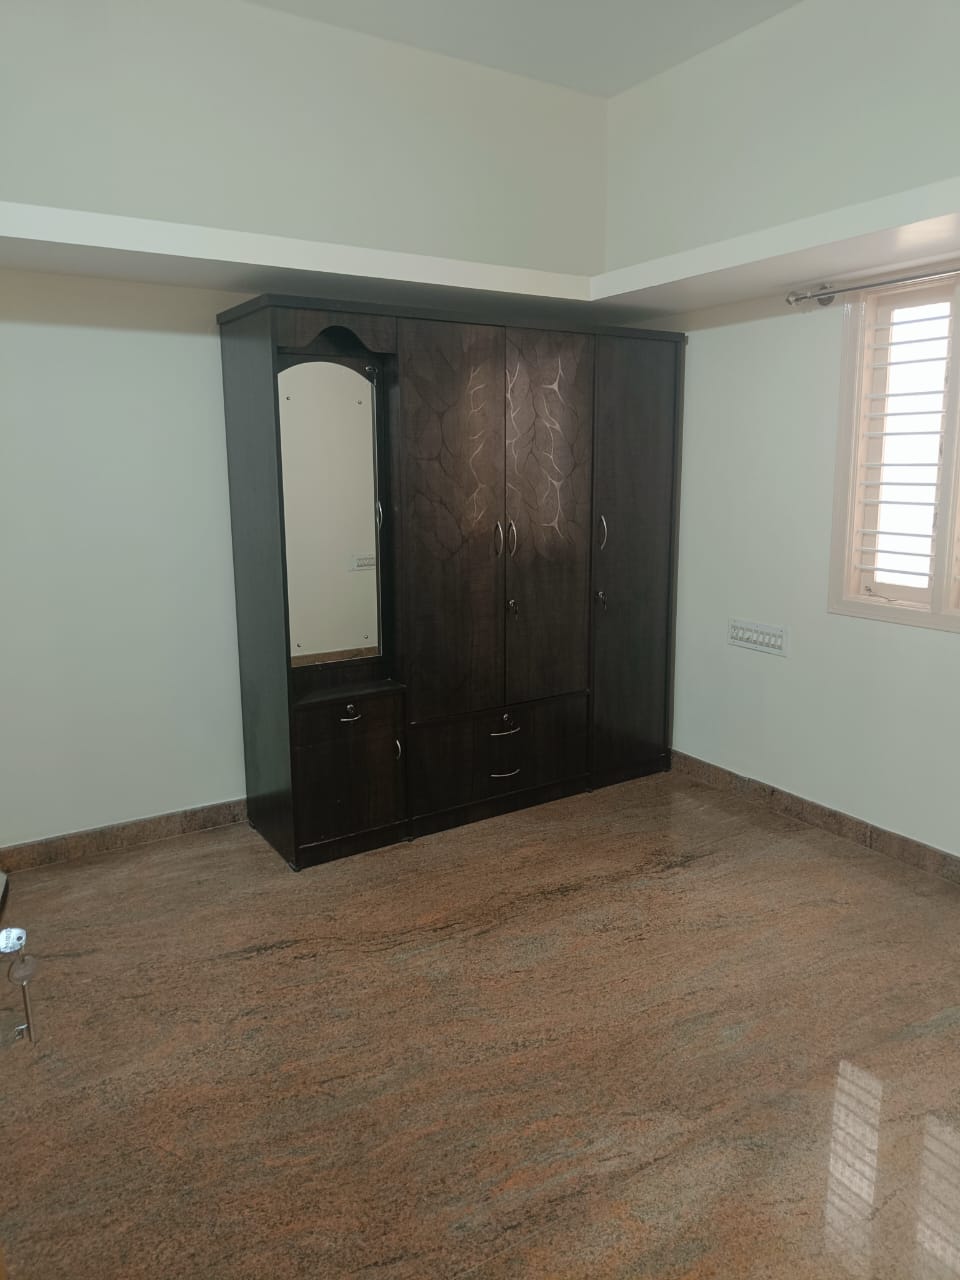 2 BHK Independent House for Lease Only at JAML2 - 2945 in Dinnur